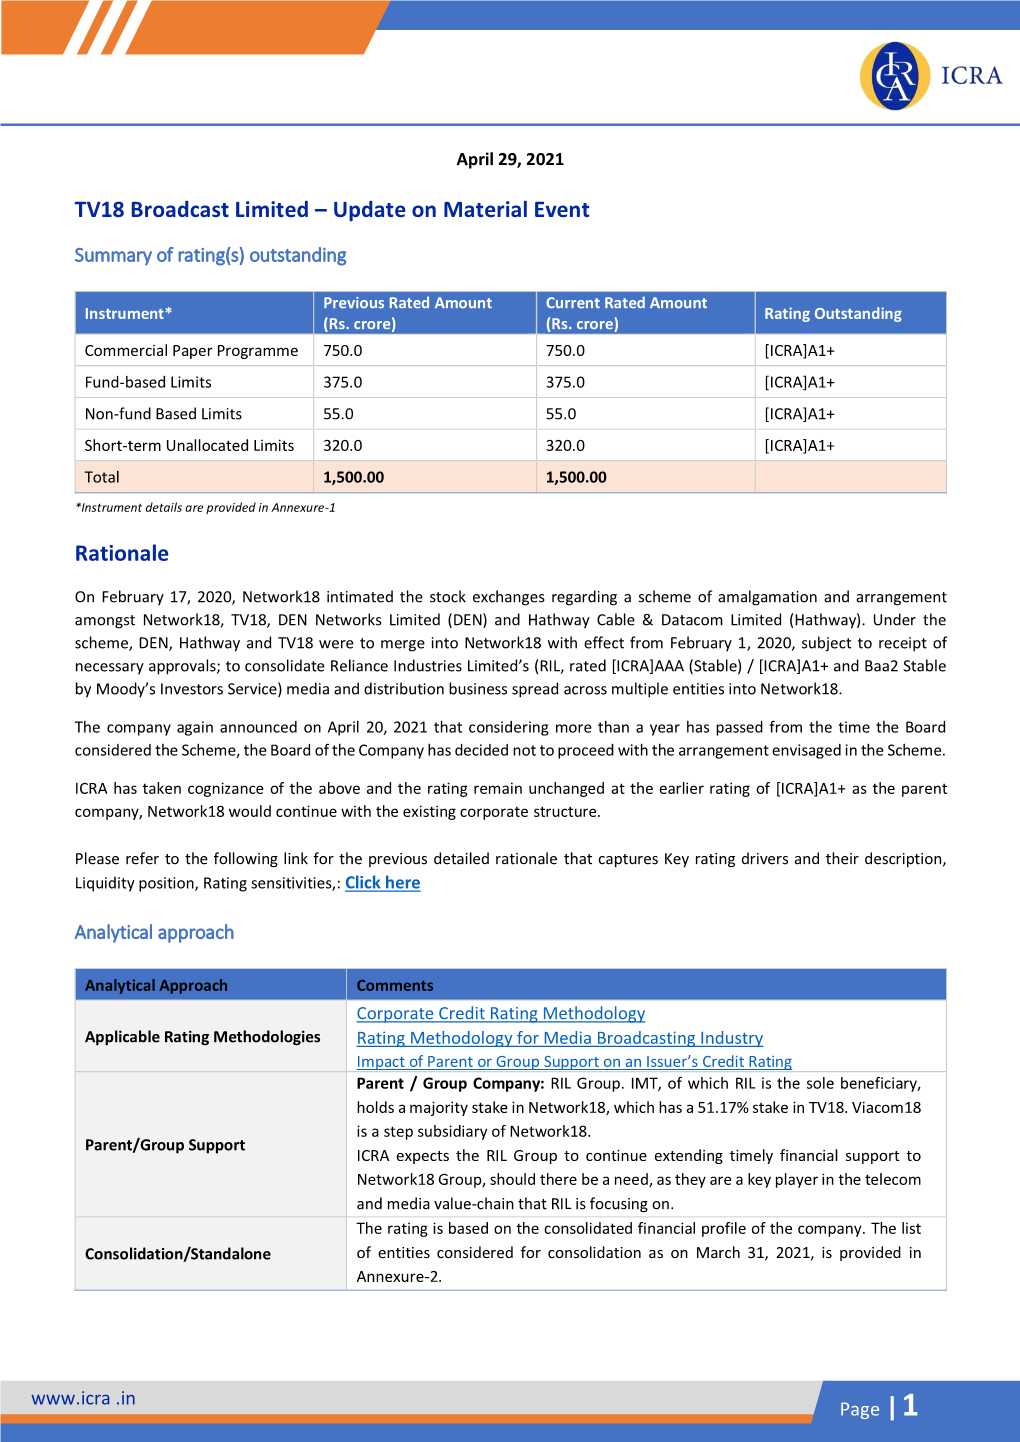 TV18 Broadcast Limited – Update on Material Event Rationale